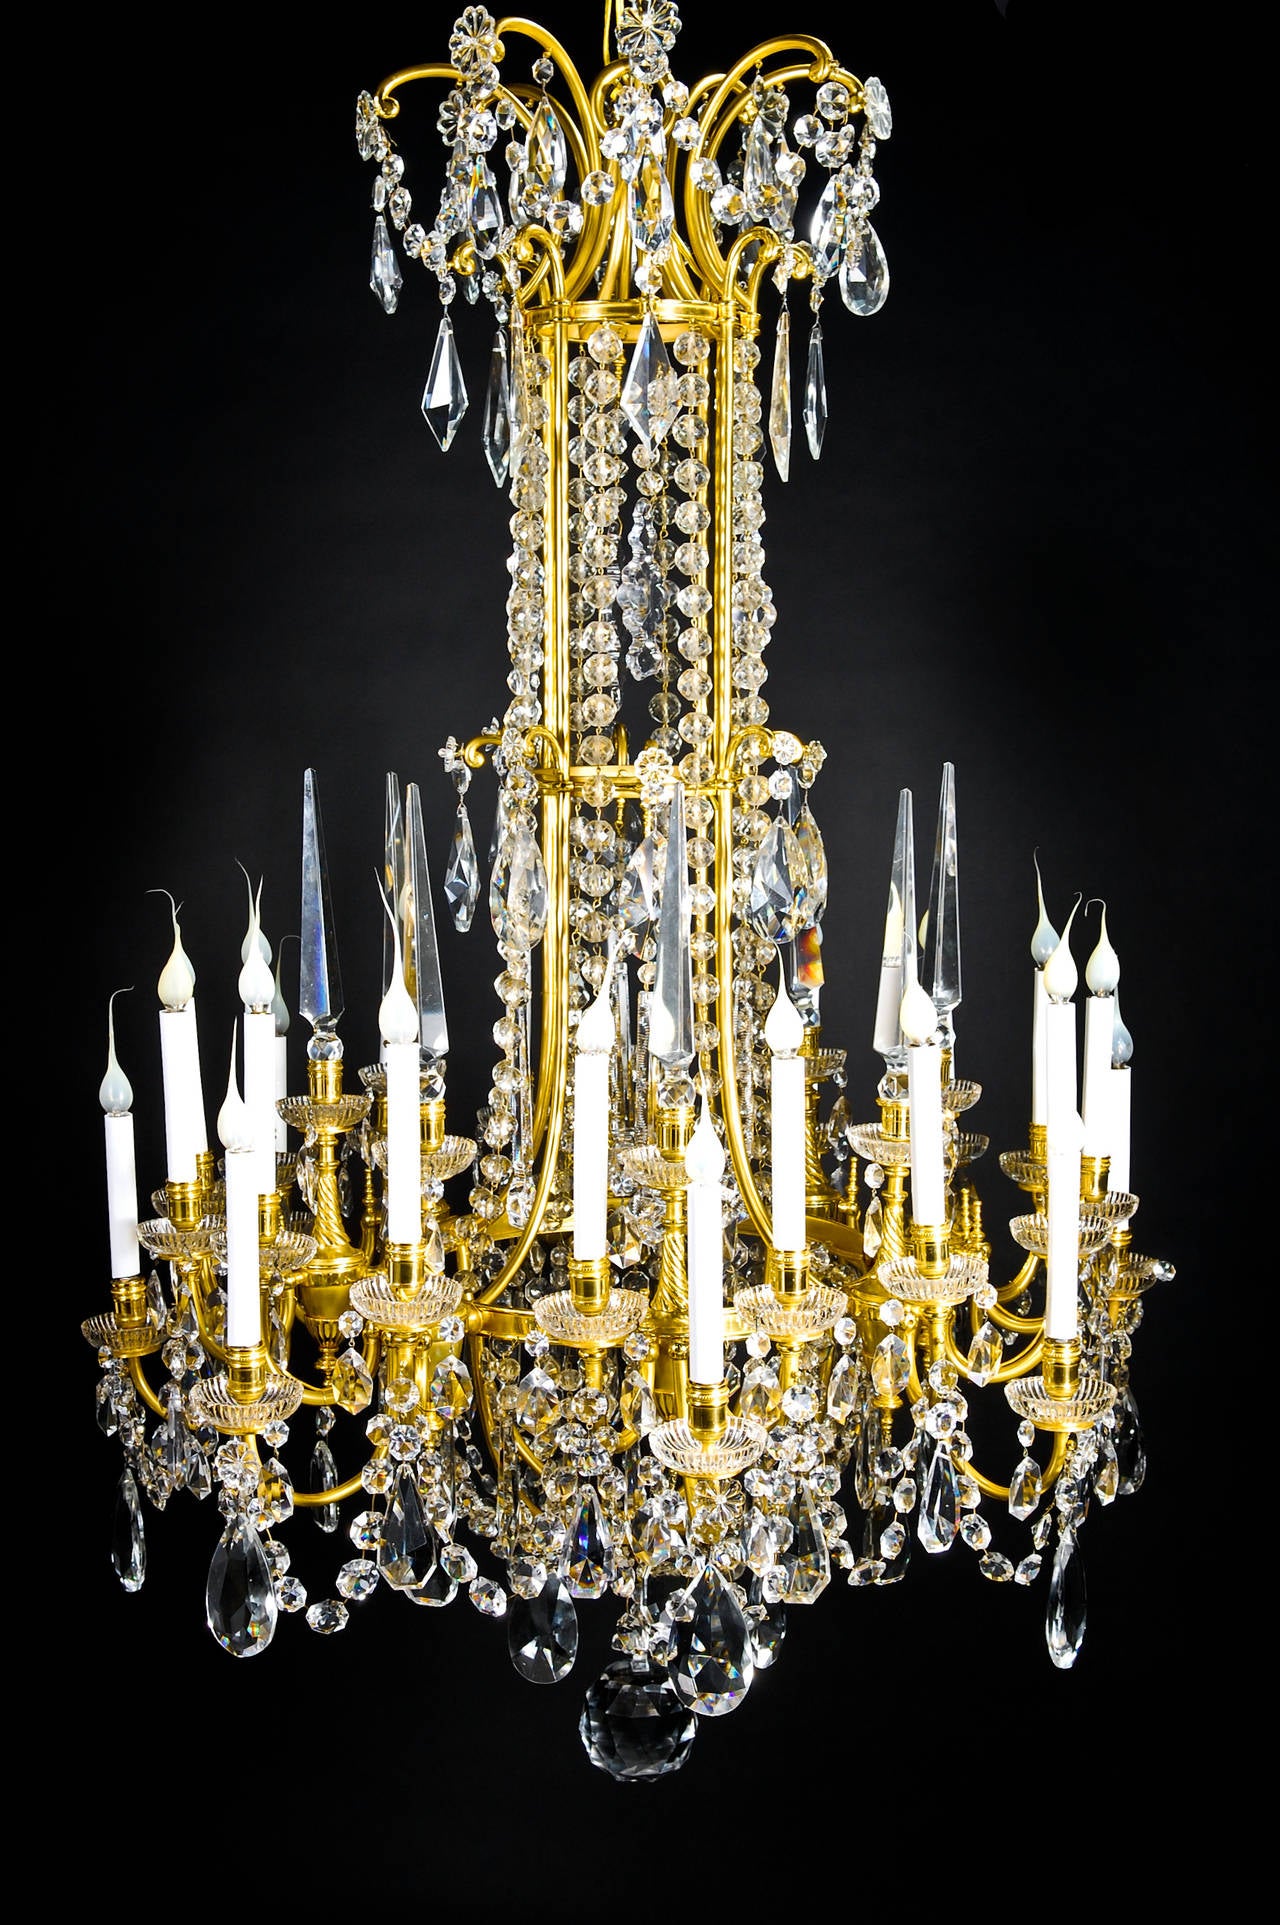 A spectacular and large antique French Louis XVI style gilt bronze and cut crystal triple tier multi light chandelier embellished with glass bobeches, cut crystal chains and further adorned with cut crystal prisms by Baccarat.